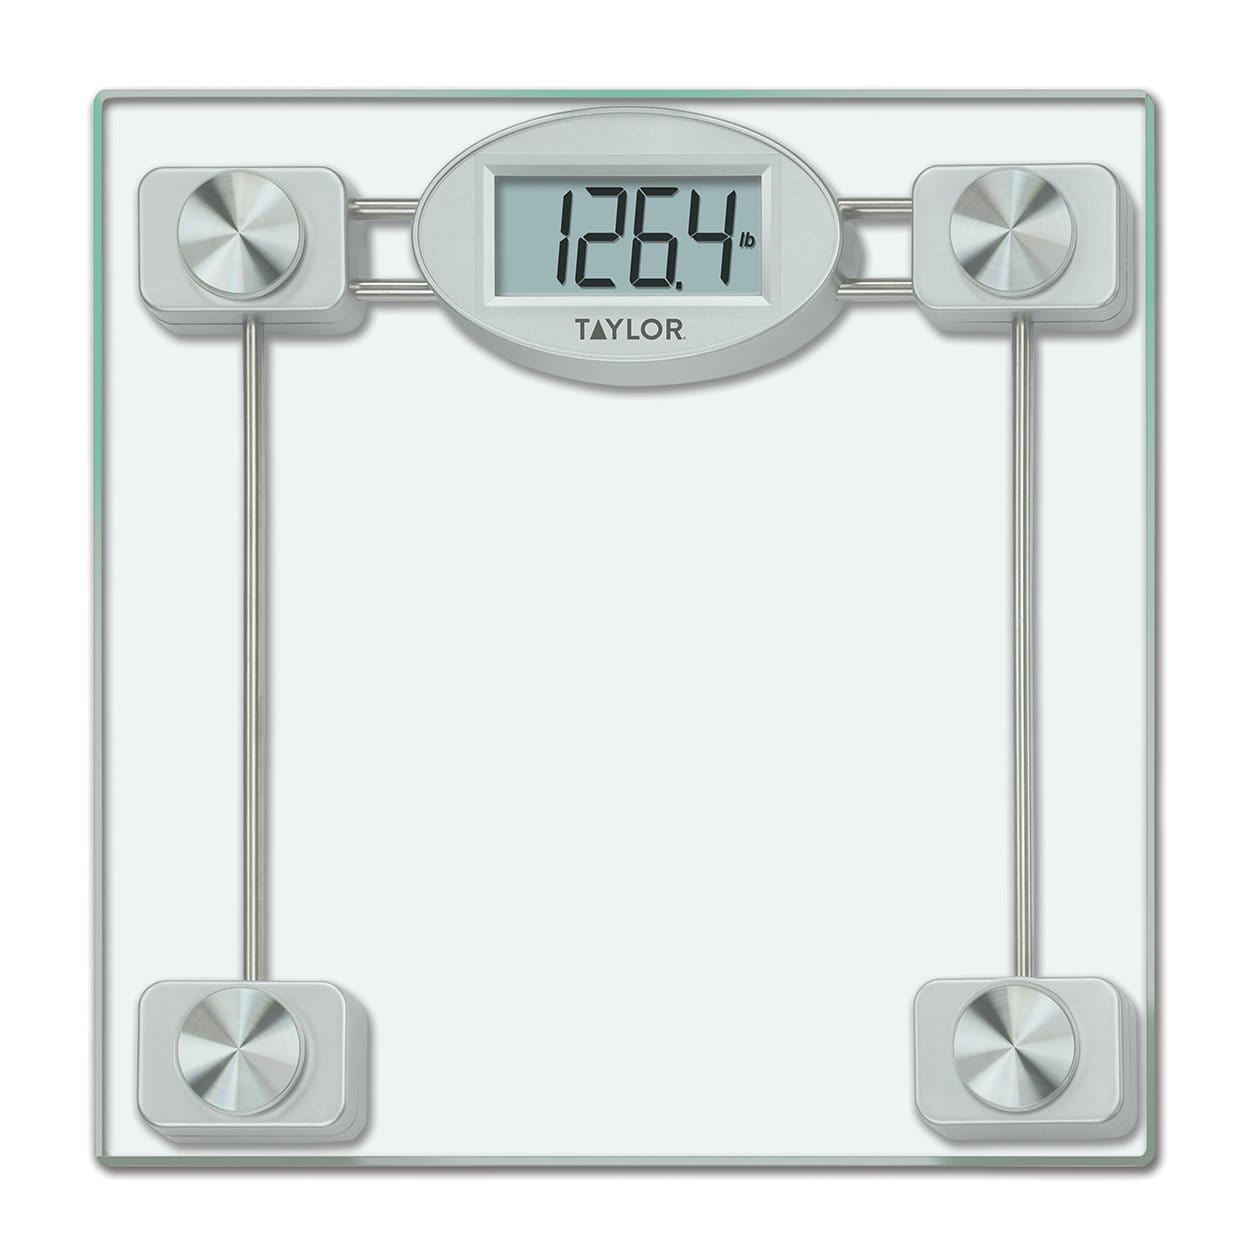 Digital Bathroom Scale with Stainless Steel Frame